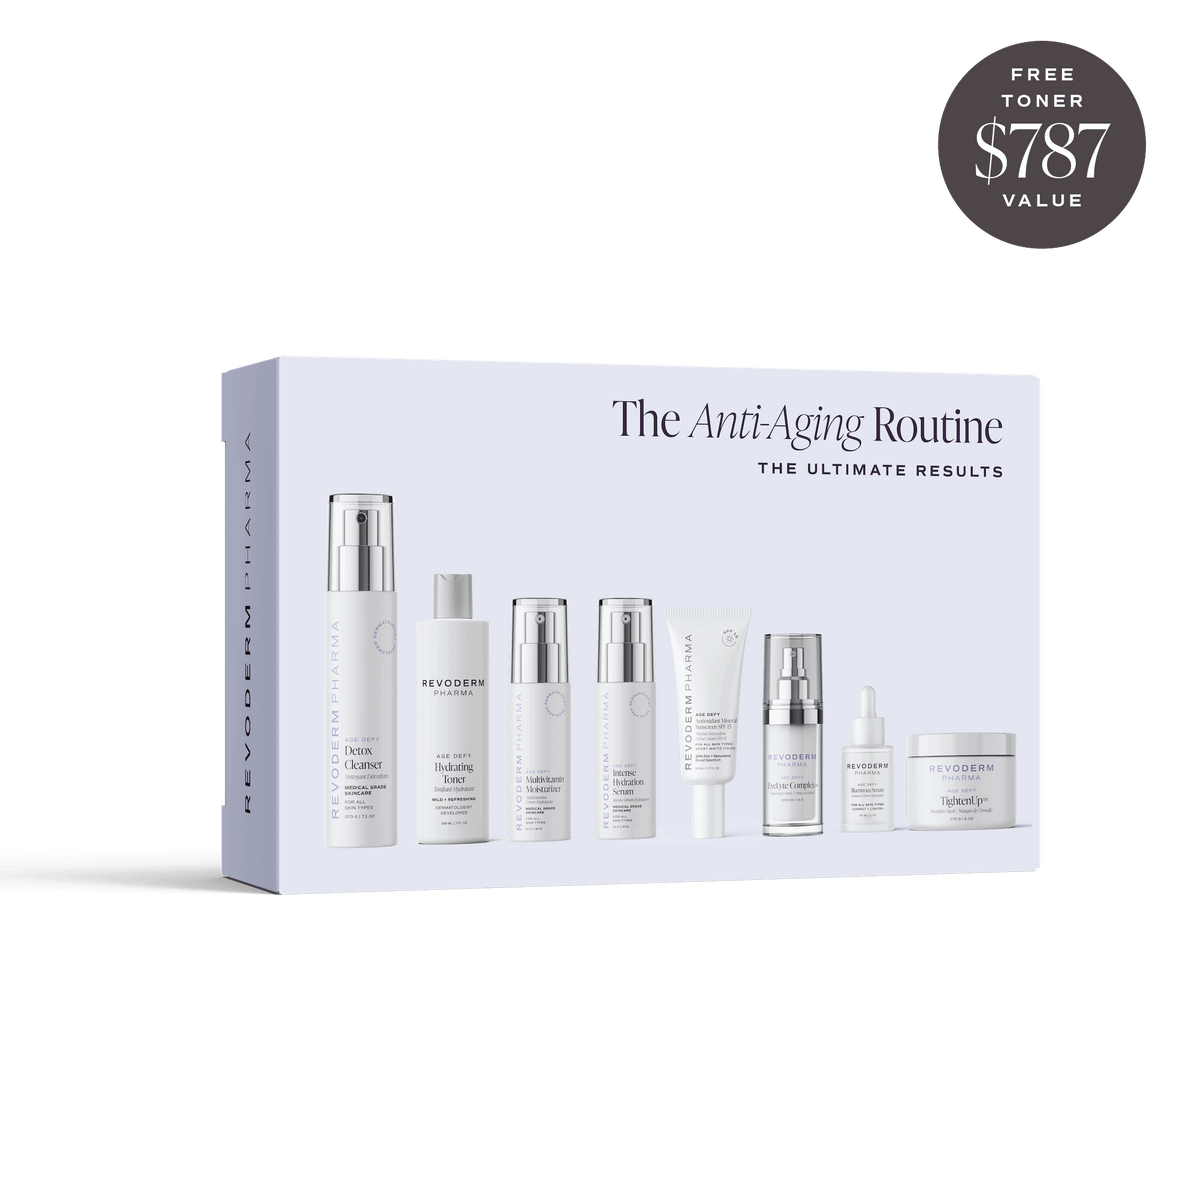 The Ultimate Results Routine: Anti-Aging